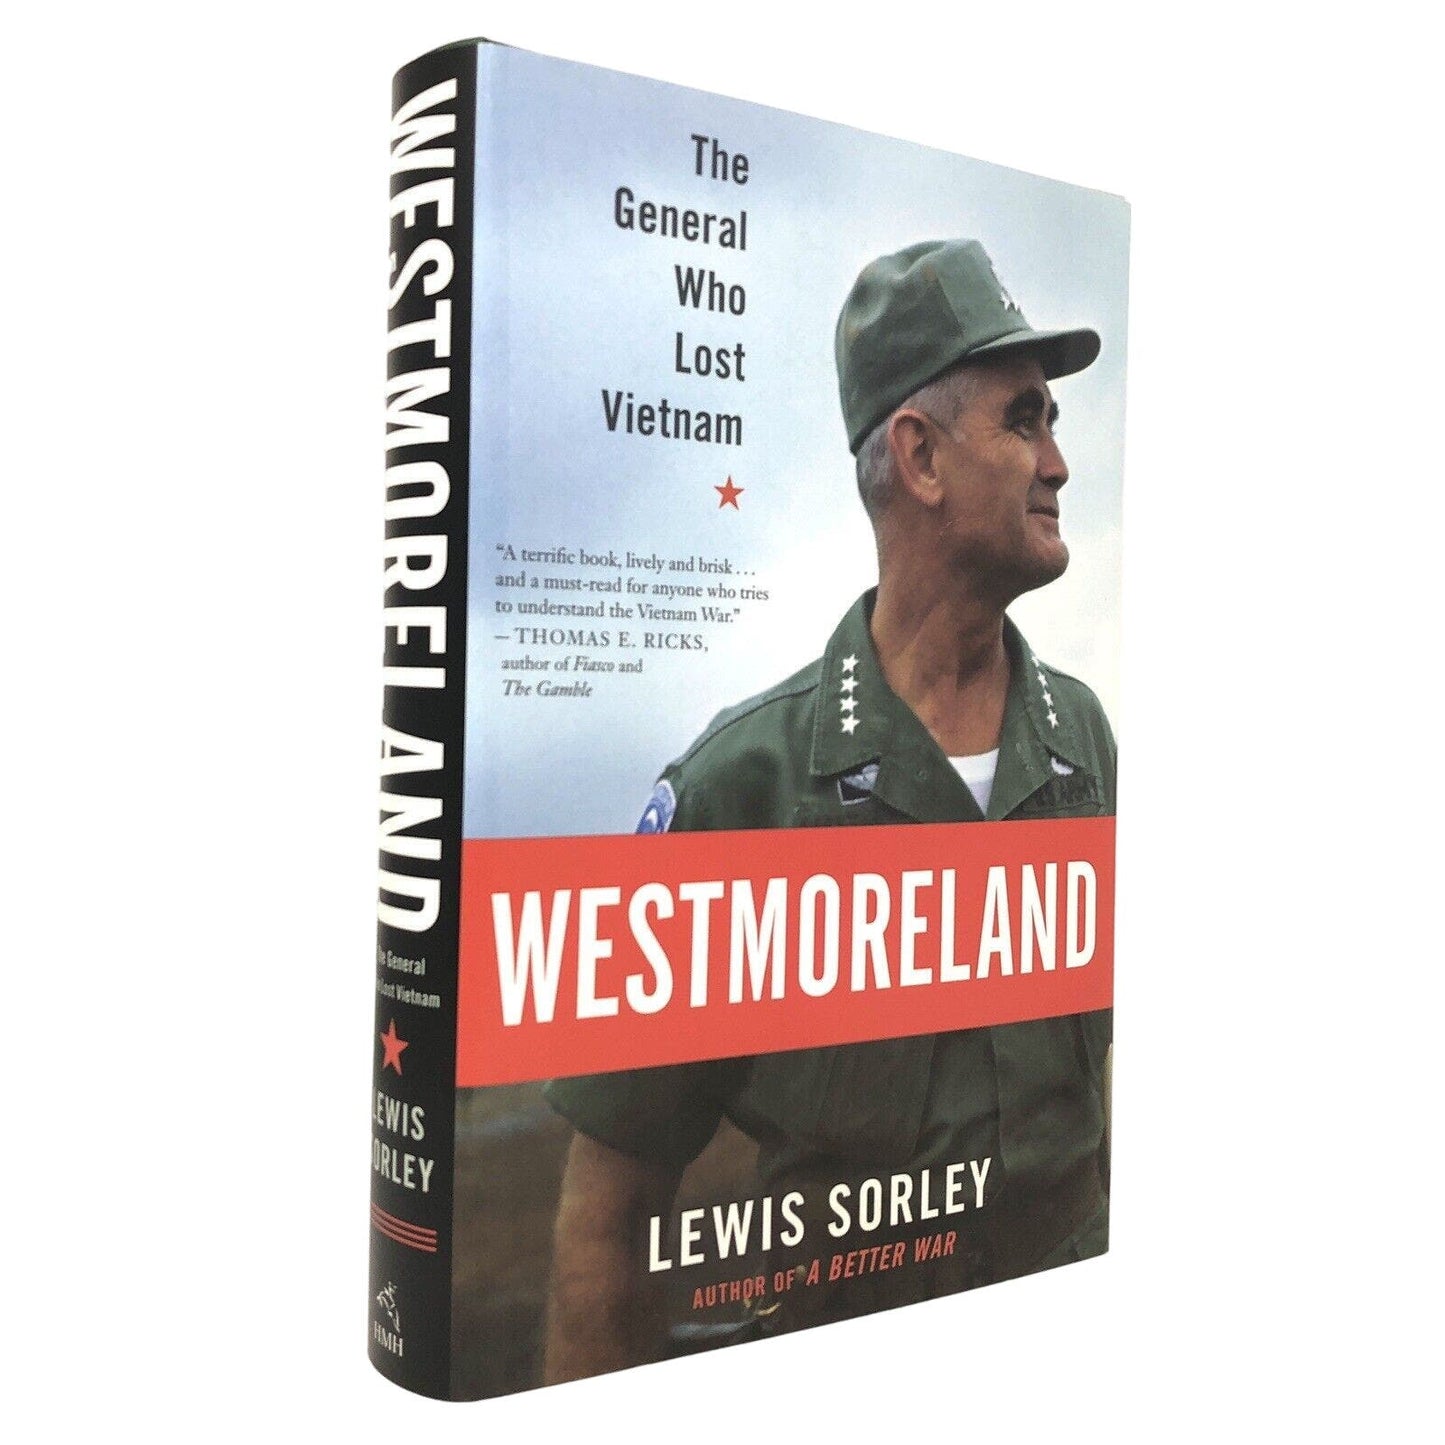 (Signed) Westmoreland The General Who Lost Vietnam by Lewis Sorley ~ 1st Edition - Uncle Buddy's Beard & Used Books